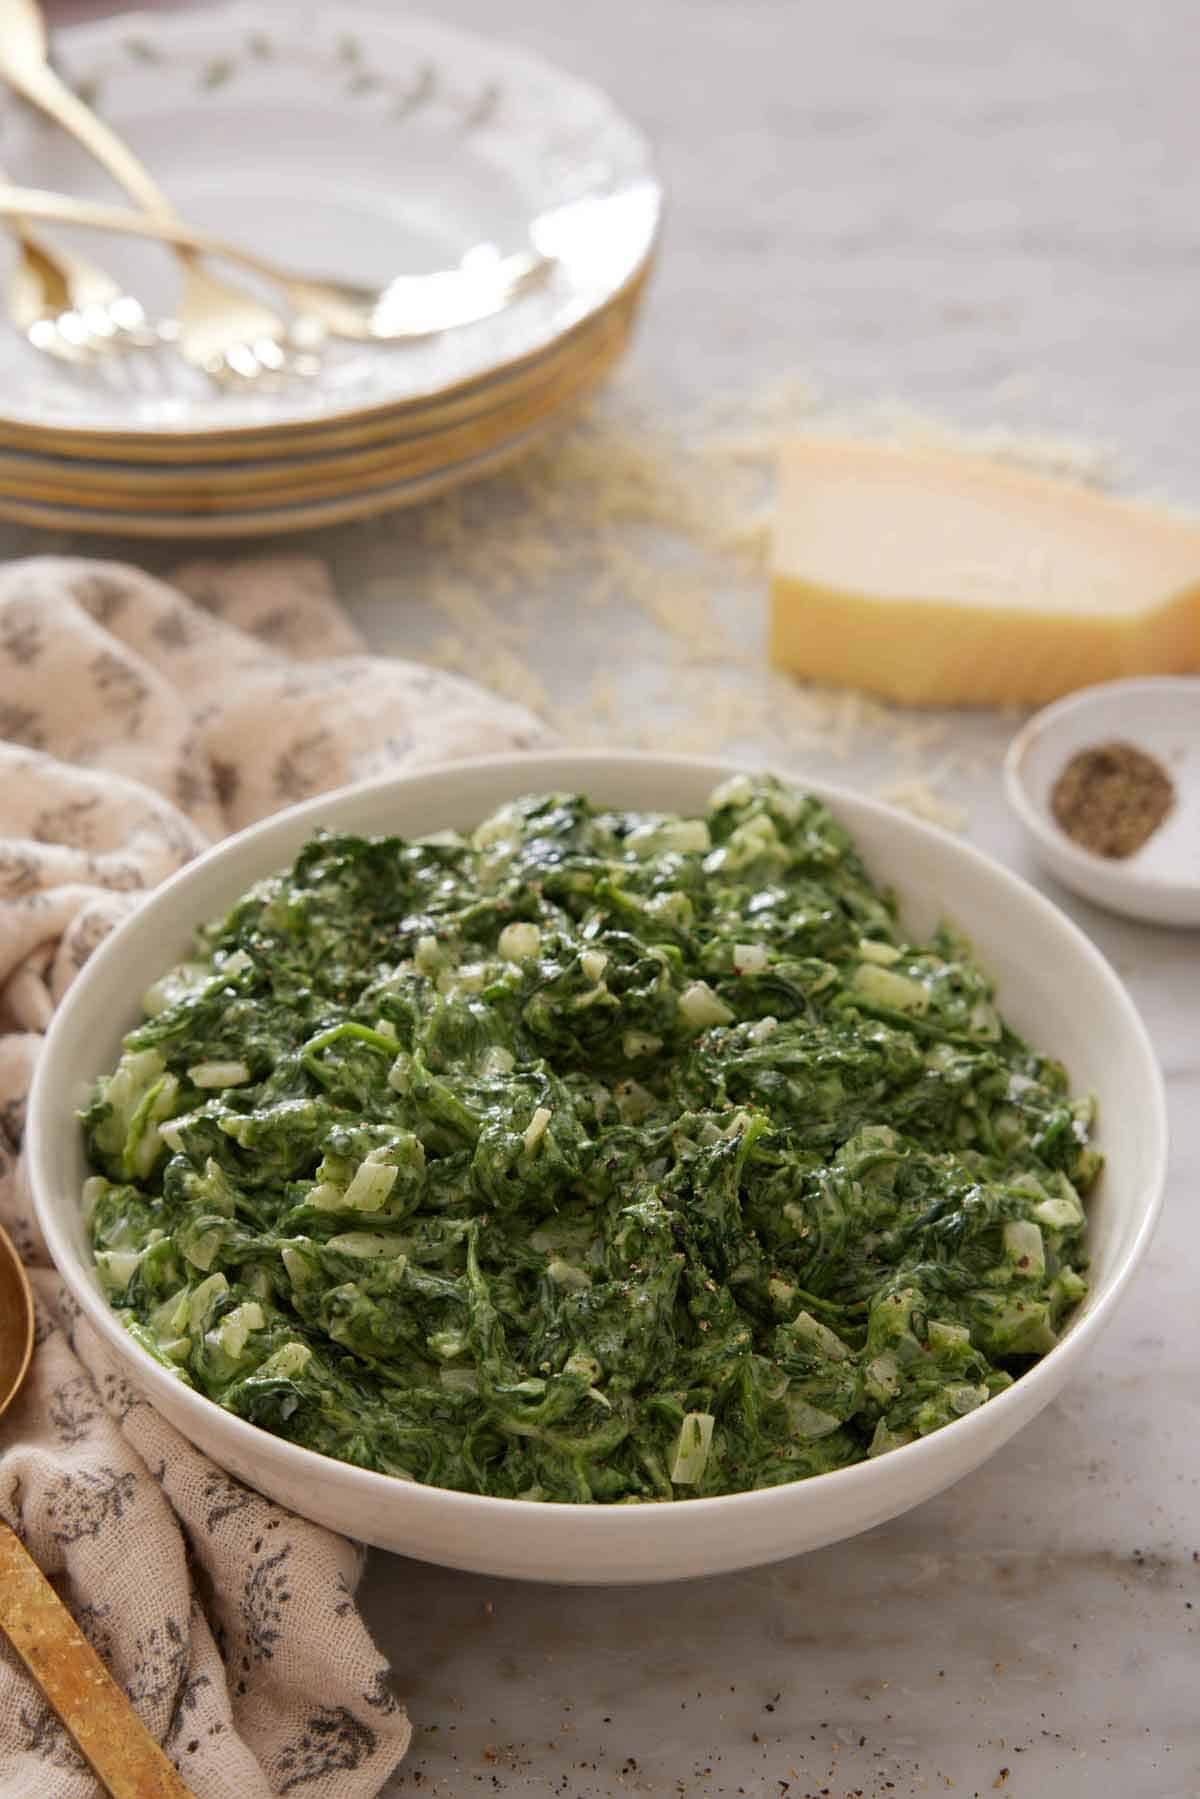 A bowl of creamed spinach with a block of grated parmesan, stack of plates, and forks in the background.